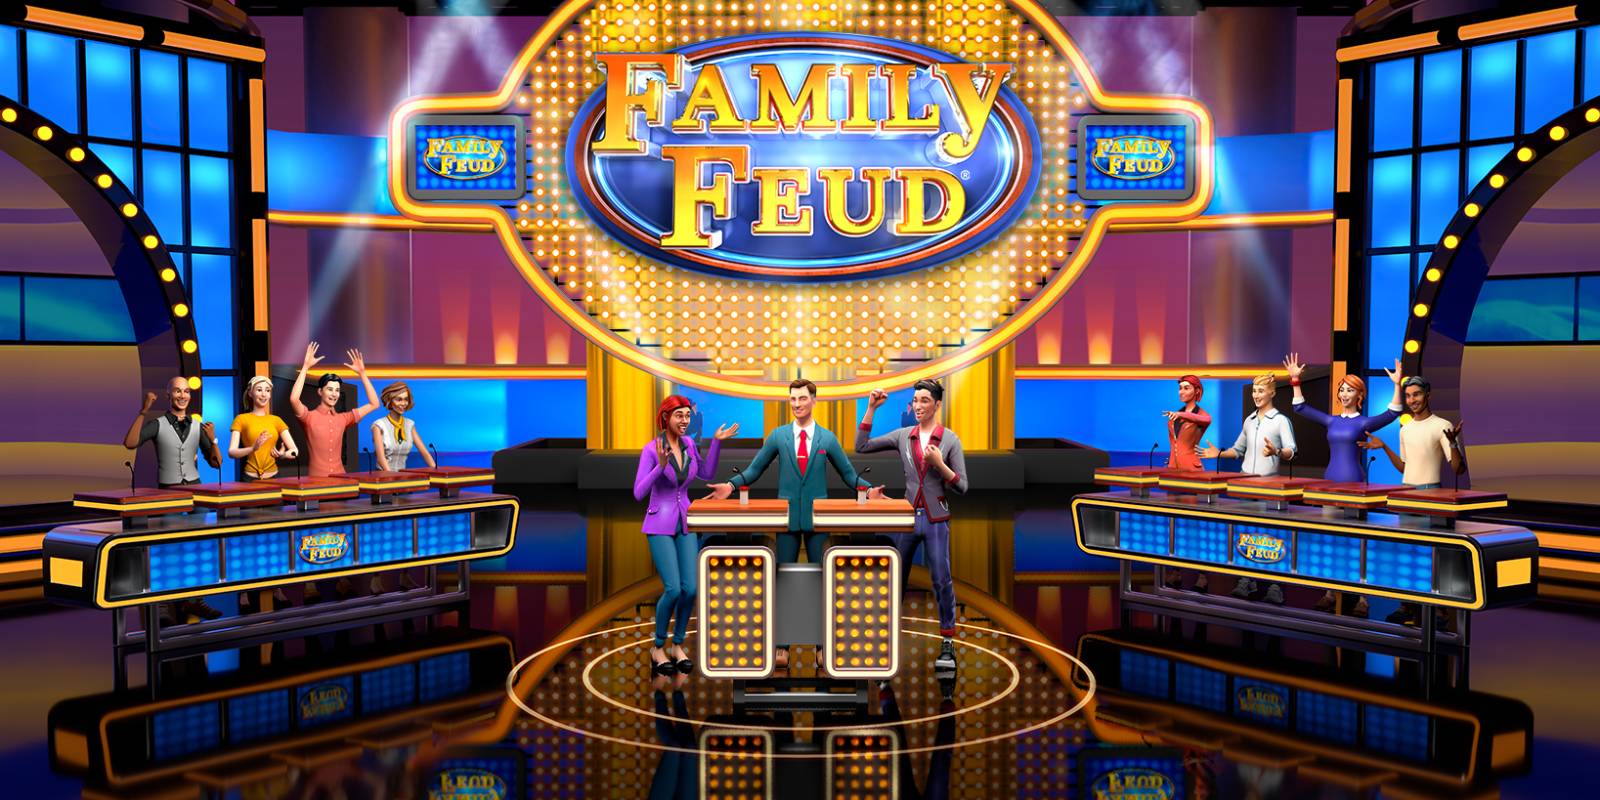 ubisoft-is-bringing-family-feud-to-stadia-9to5google